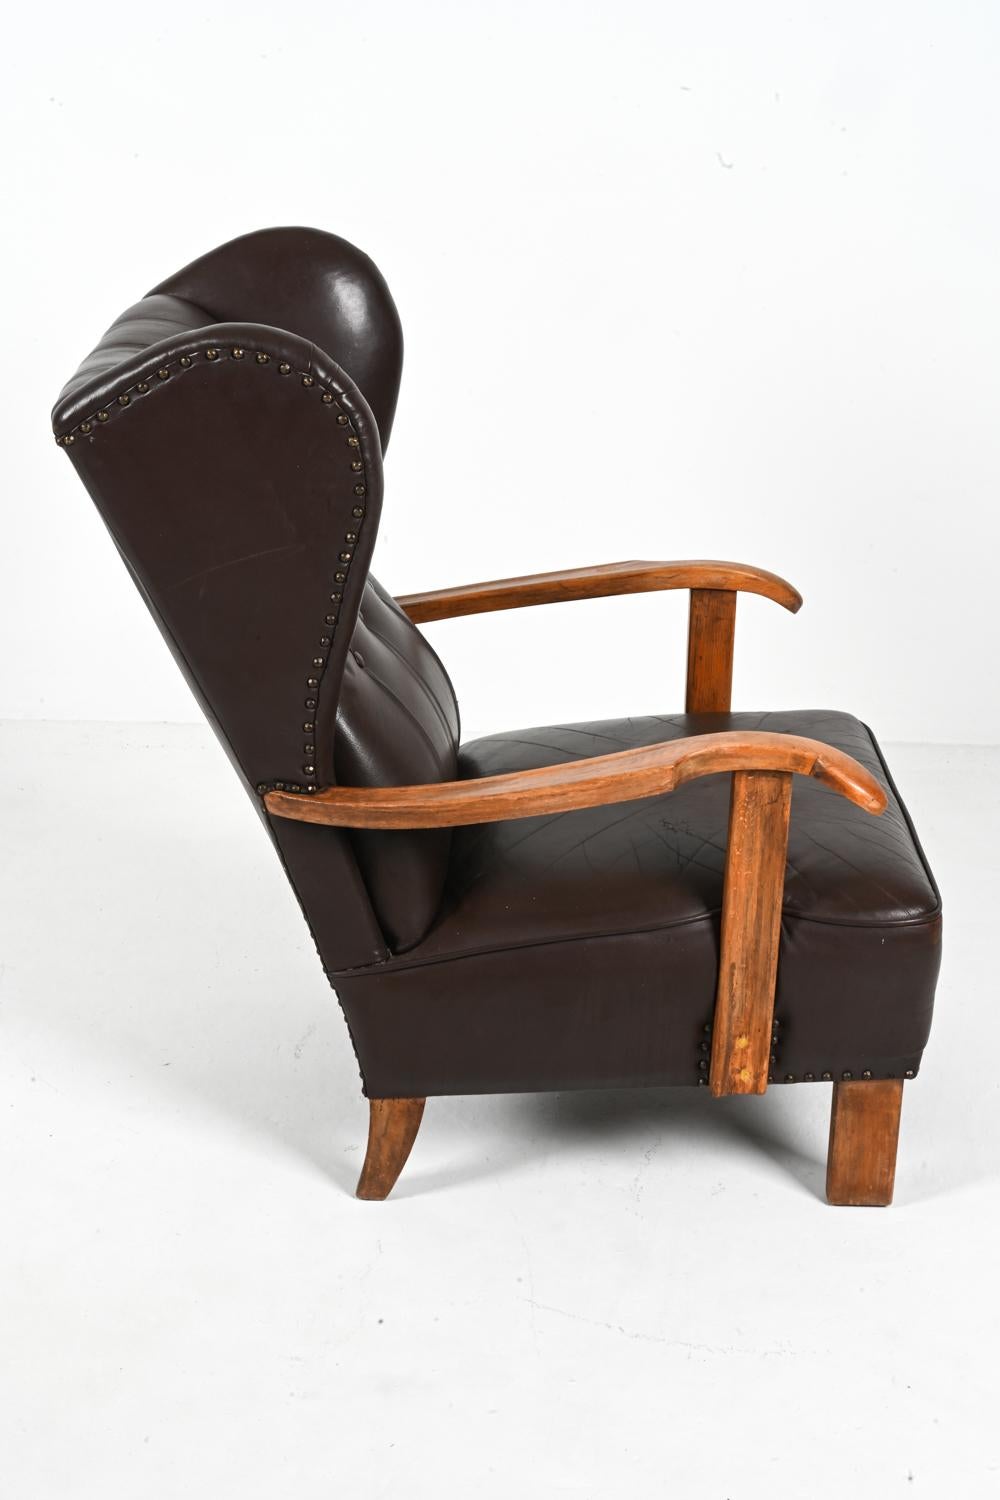 Fritz Hansen Model 1582 Wingback Lounge Chair in Beech & Leather, c. 1940's For Sale 7